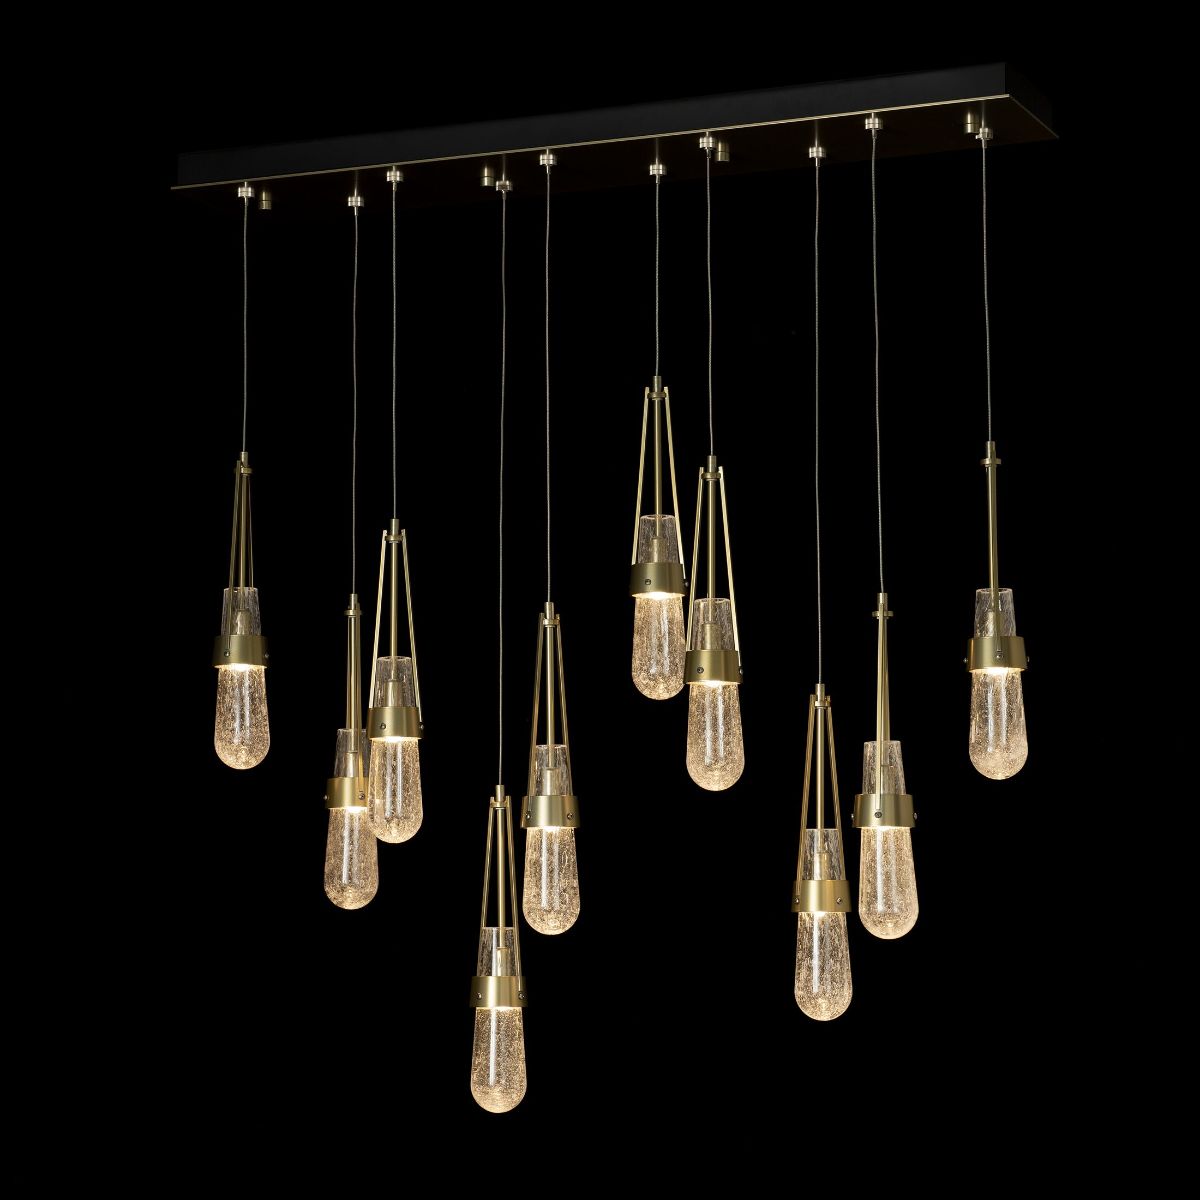 Link 45 in. 10 Lights Linear Pendant Light with Long Height